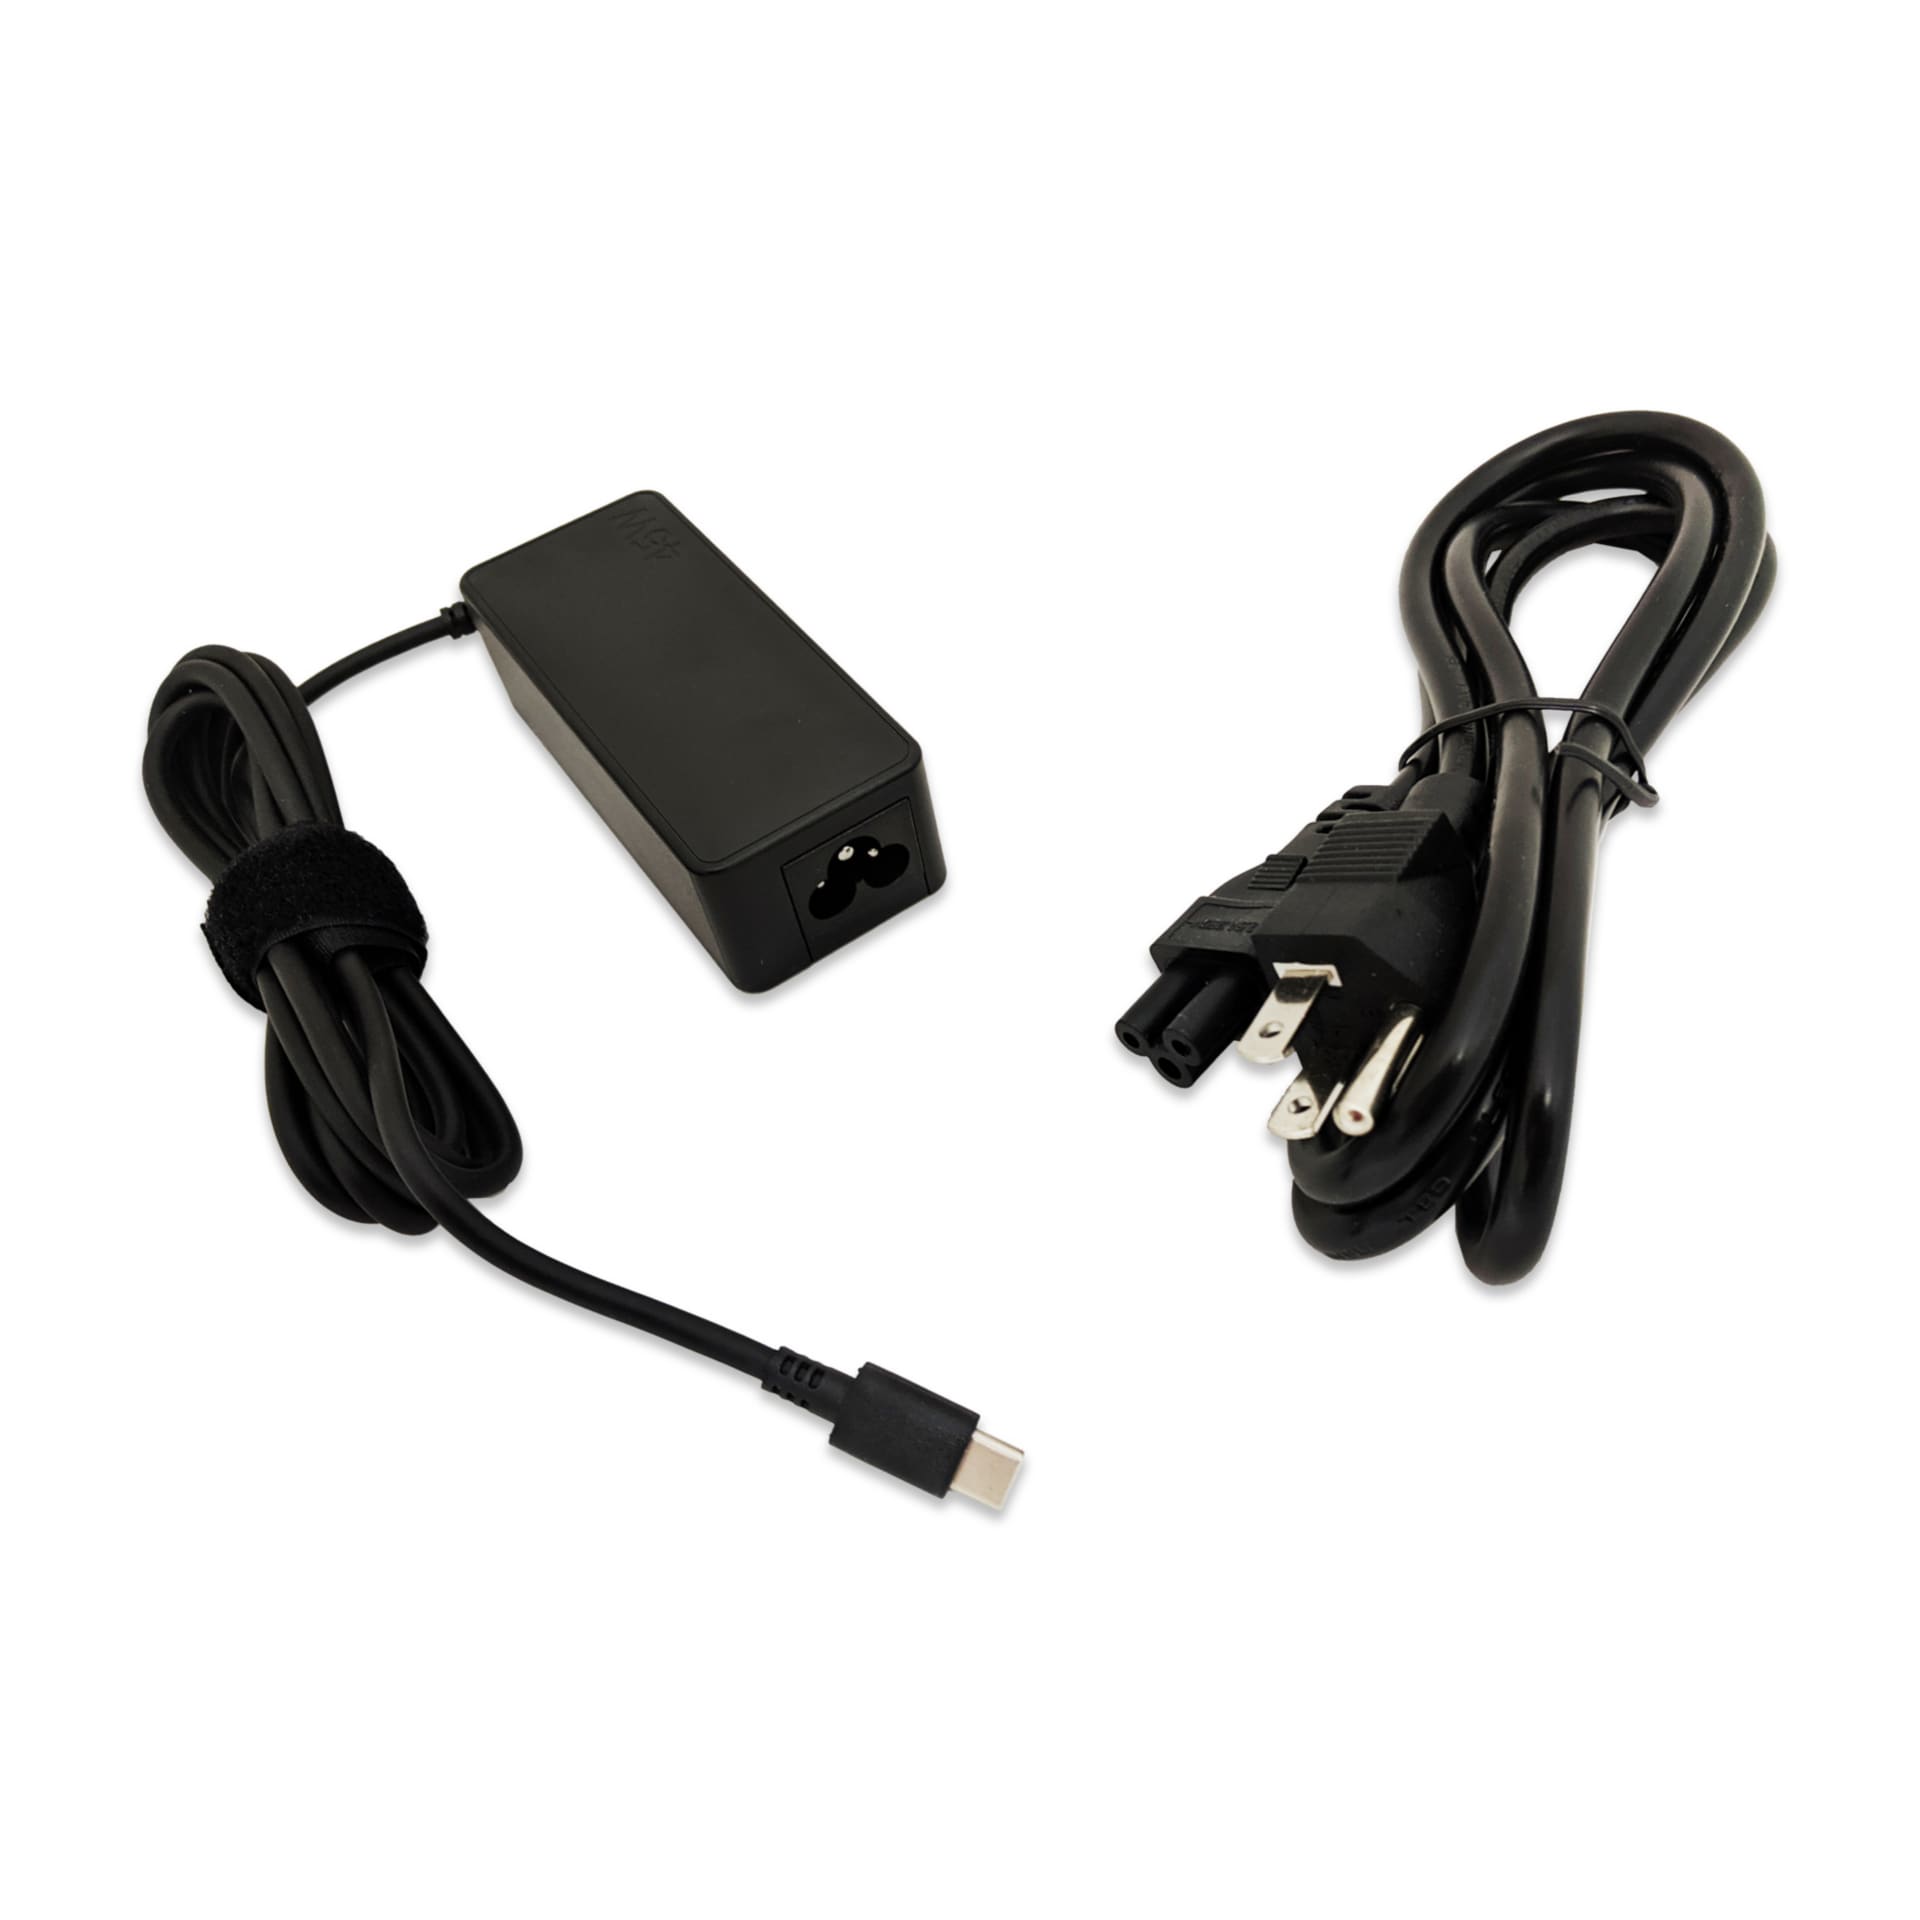 How to Choose the Right AC Adapter for Your Device